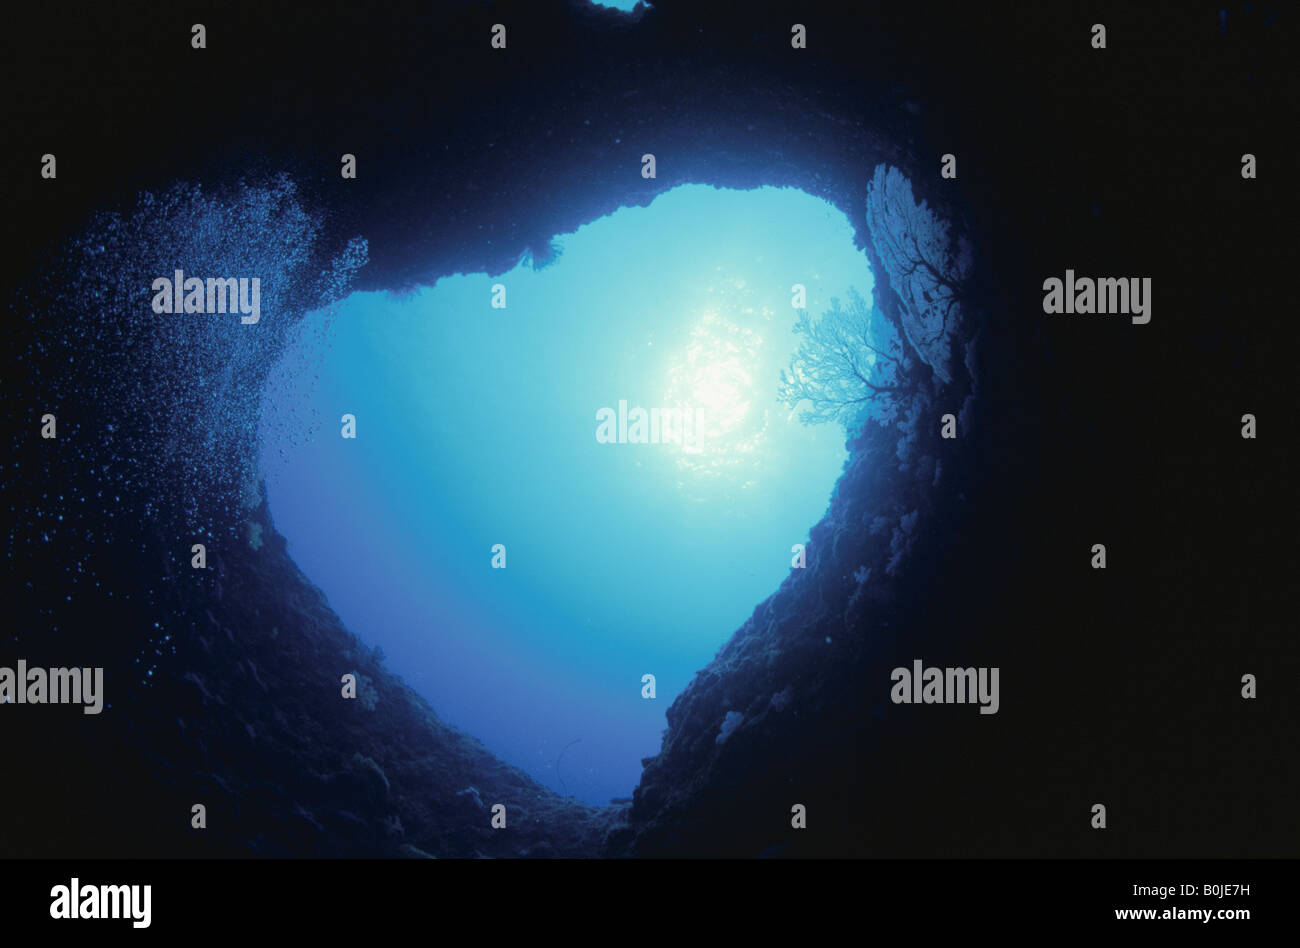 The Underwater Cave With The Heart Shape Stock Photo